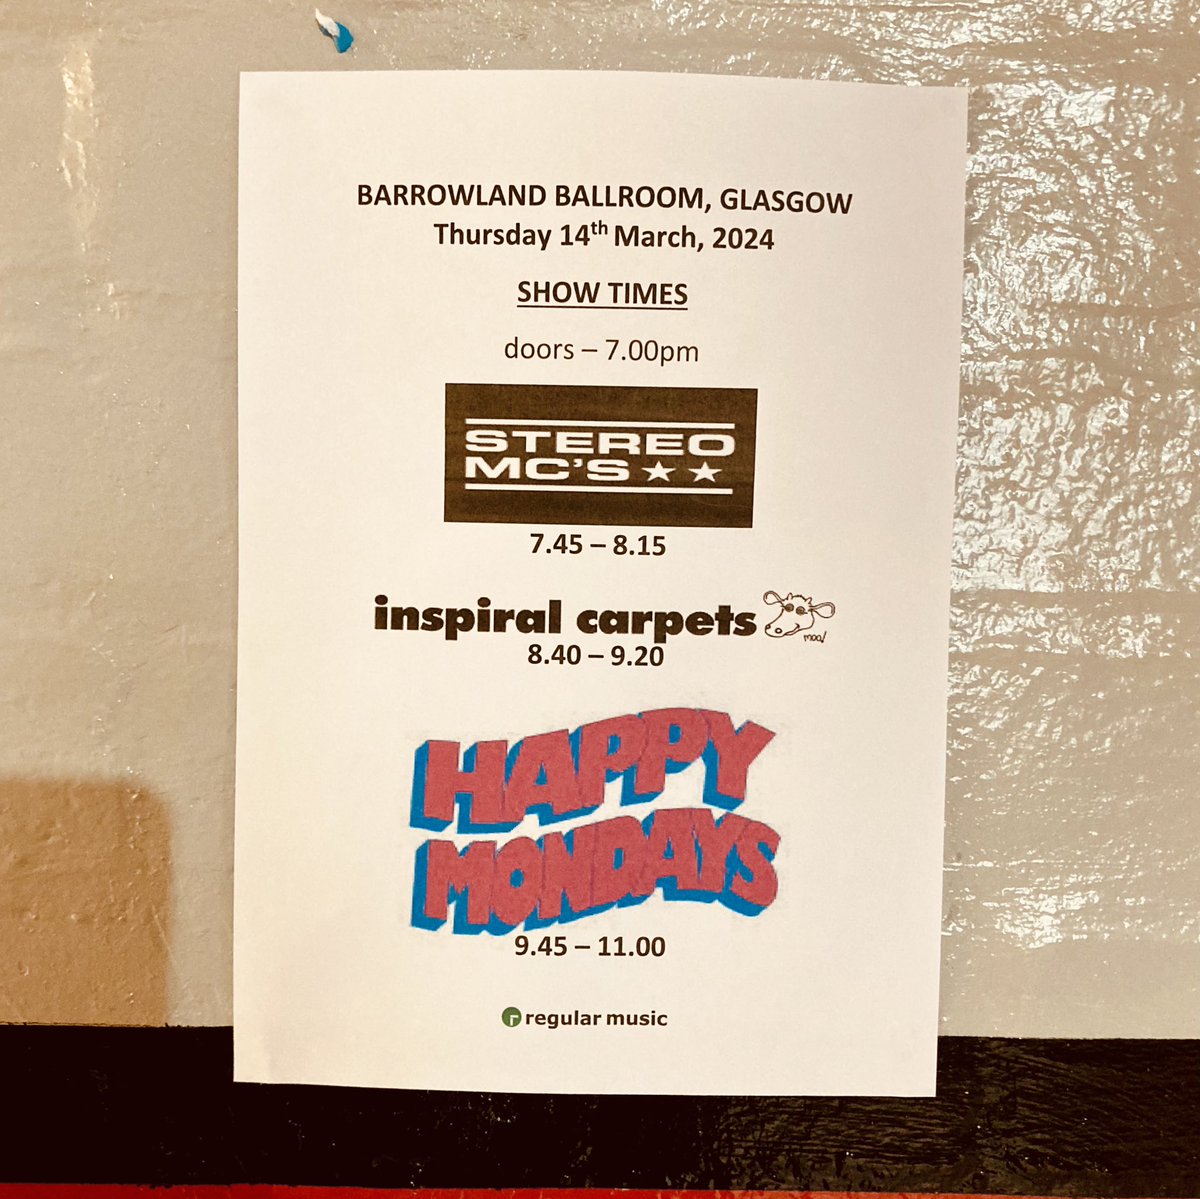 Proper excited to be back at @TheBarrowlands for the first night of our tour with @Happy_Mondays & @StereoMcs_Rob_b!! Here’s the stage times xxx #Inspirals2024 #Moo #CoolAsFuck